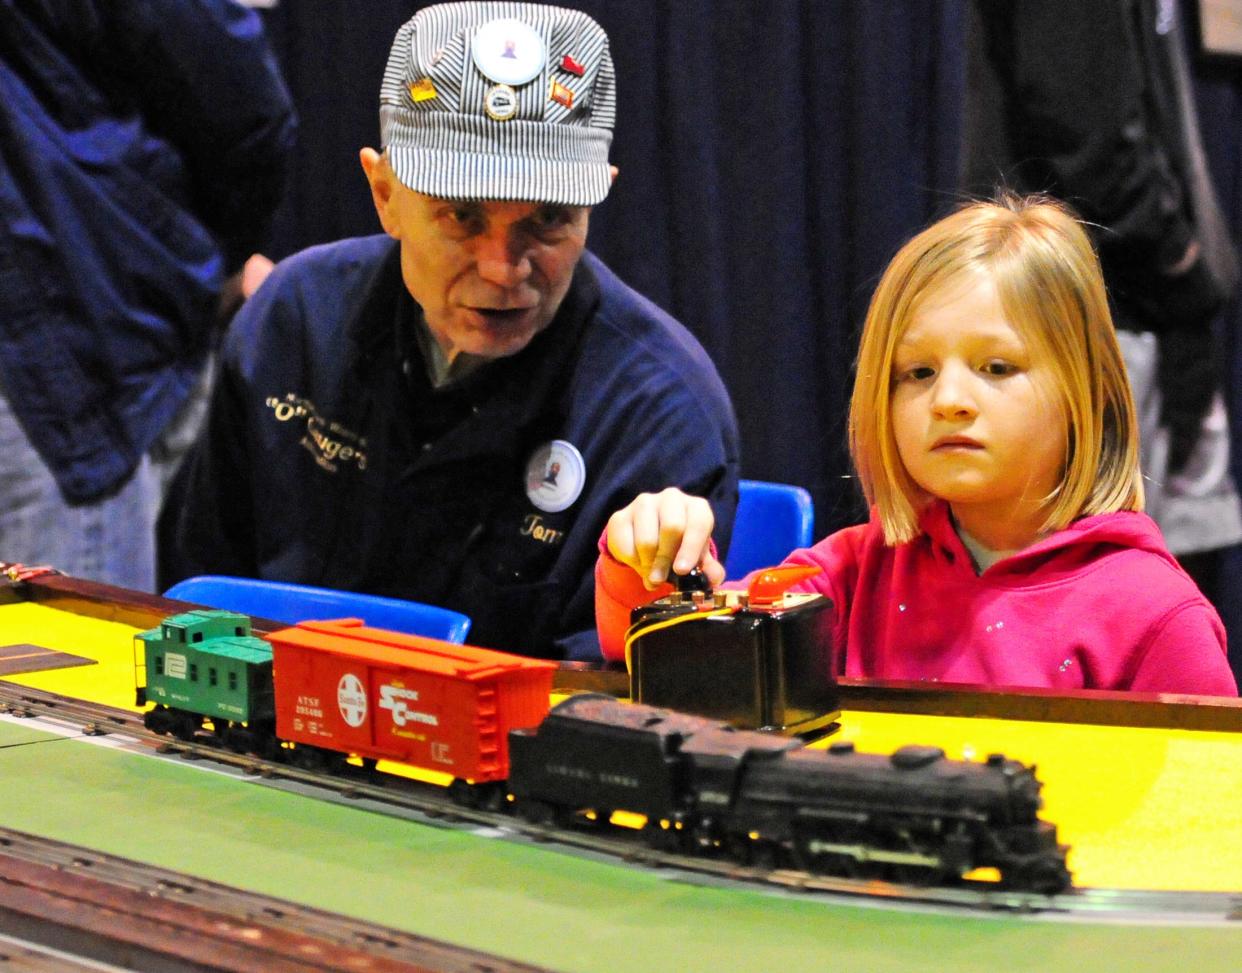 Tom Staszak, of the NEW “O” Gaugers train club, offers advice to Kimberlynn Gumm, Appleton, as she races model trains during the Titletown Train Show.